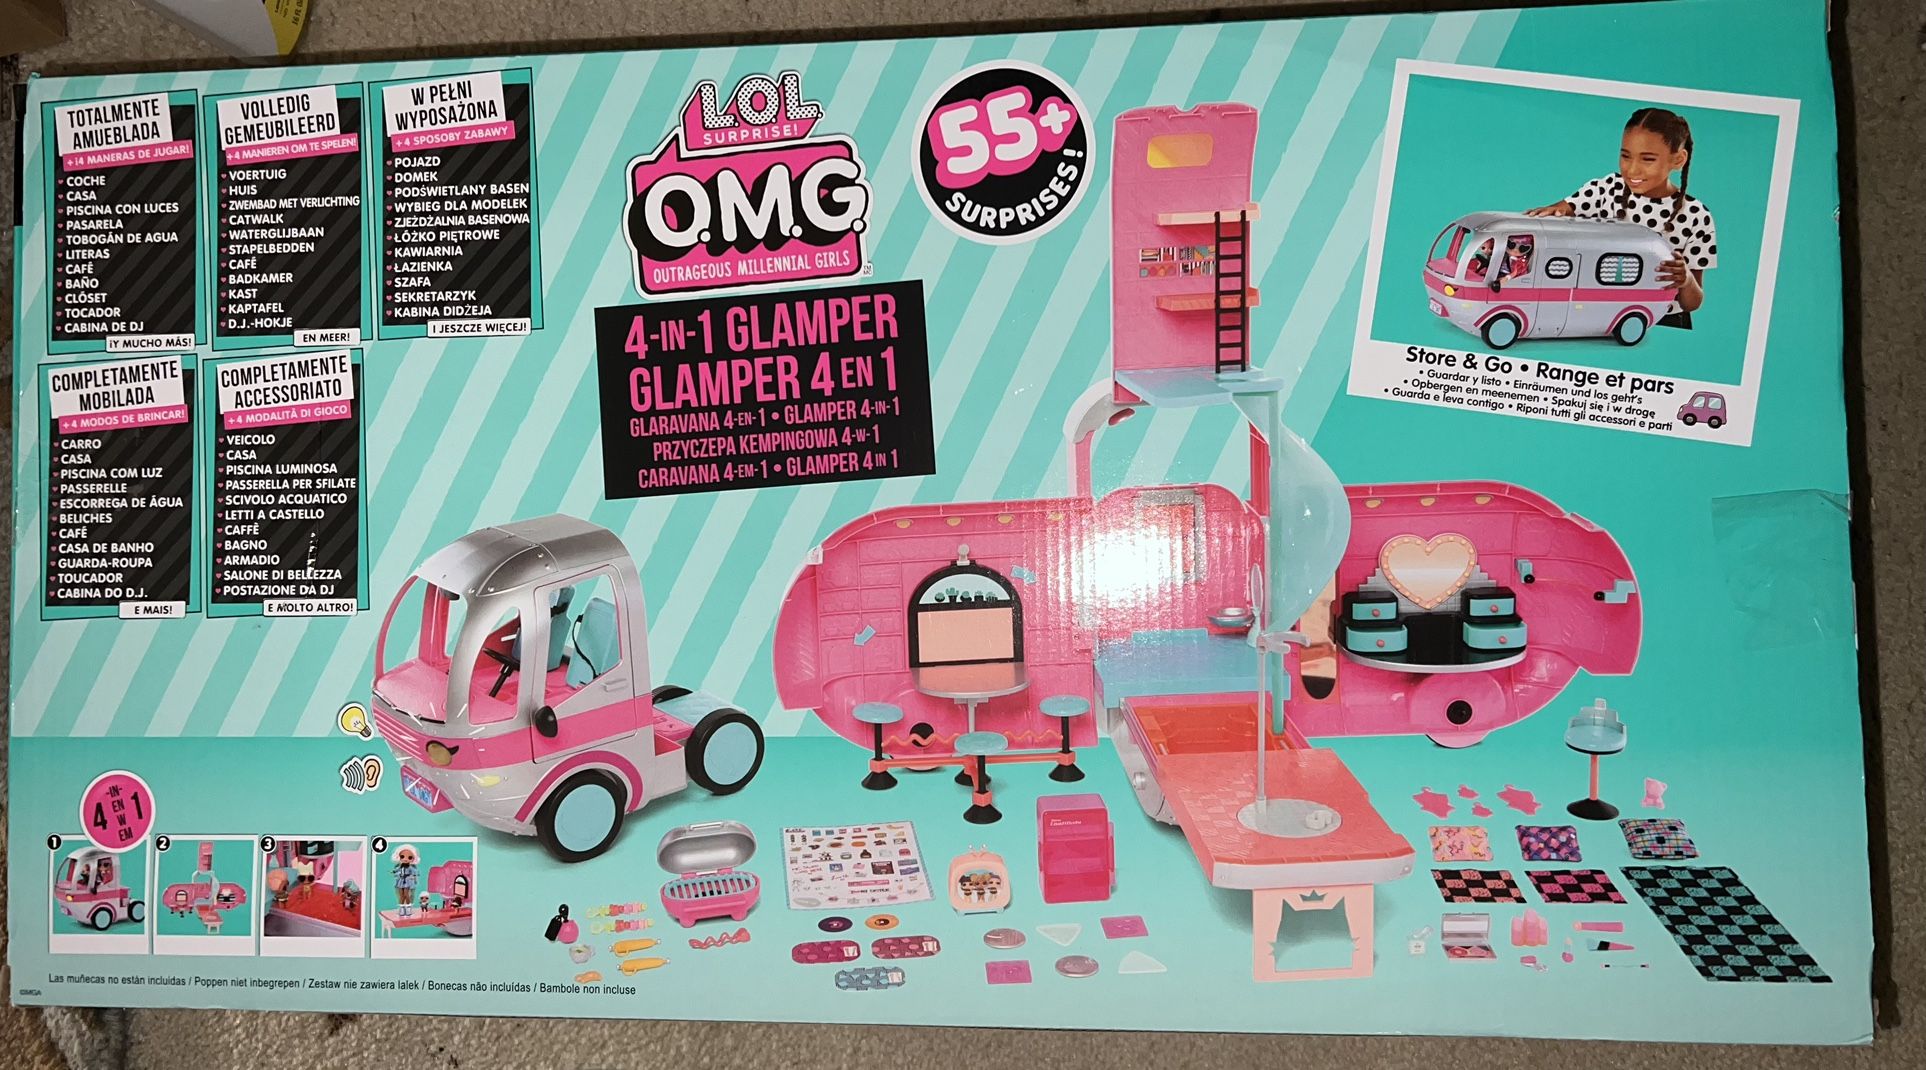 LOL Surprise Omg Glamper with 55+ Surprises Fully-Furnished with Light up Pool  The new LOL Surprise OMG Glamper is the fiercest way to travel in styl